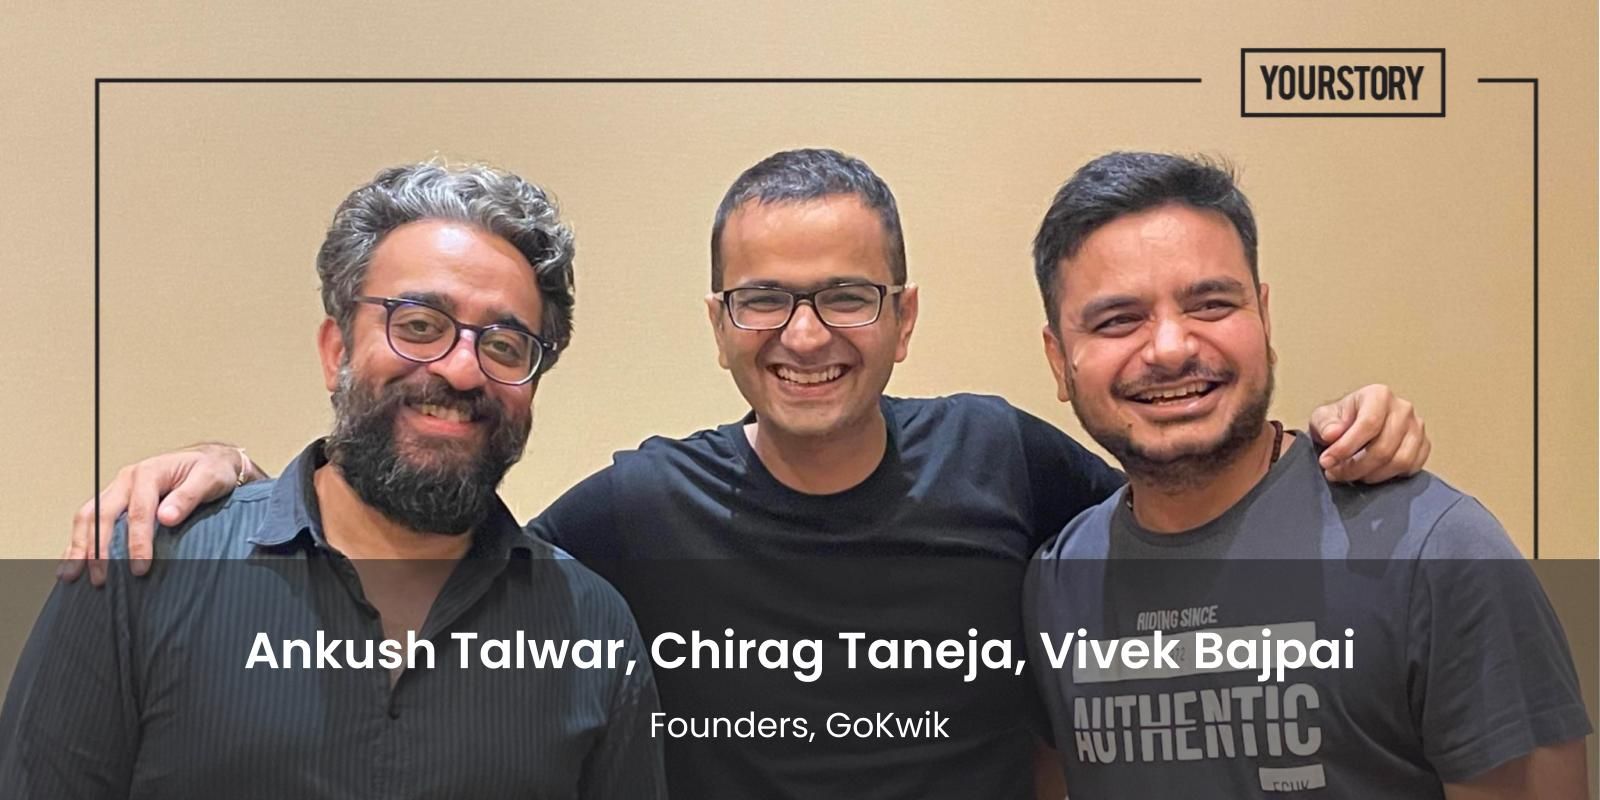 [Funding alert] GoKwik raises Rs 112 Cr in Series A investment led by Sequoia Capital India